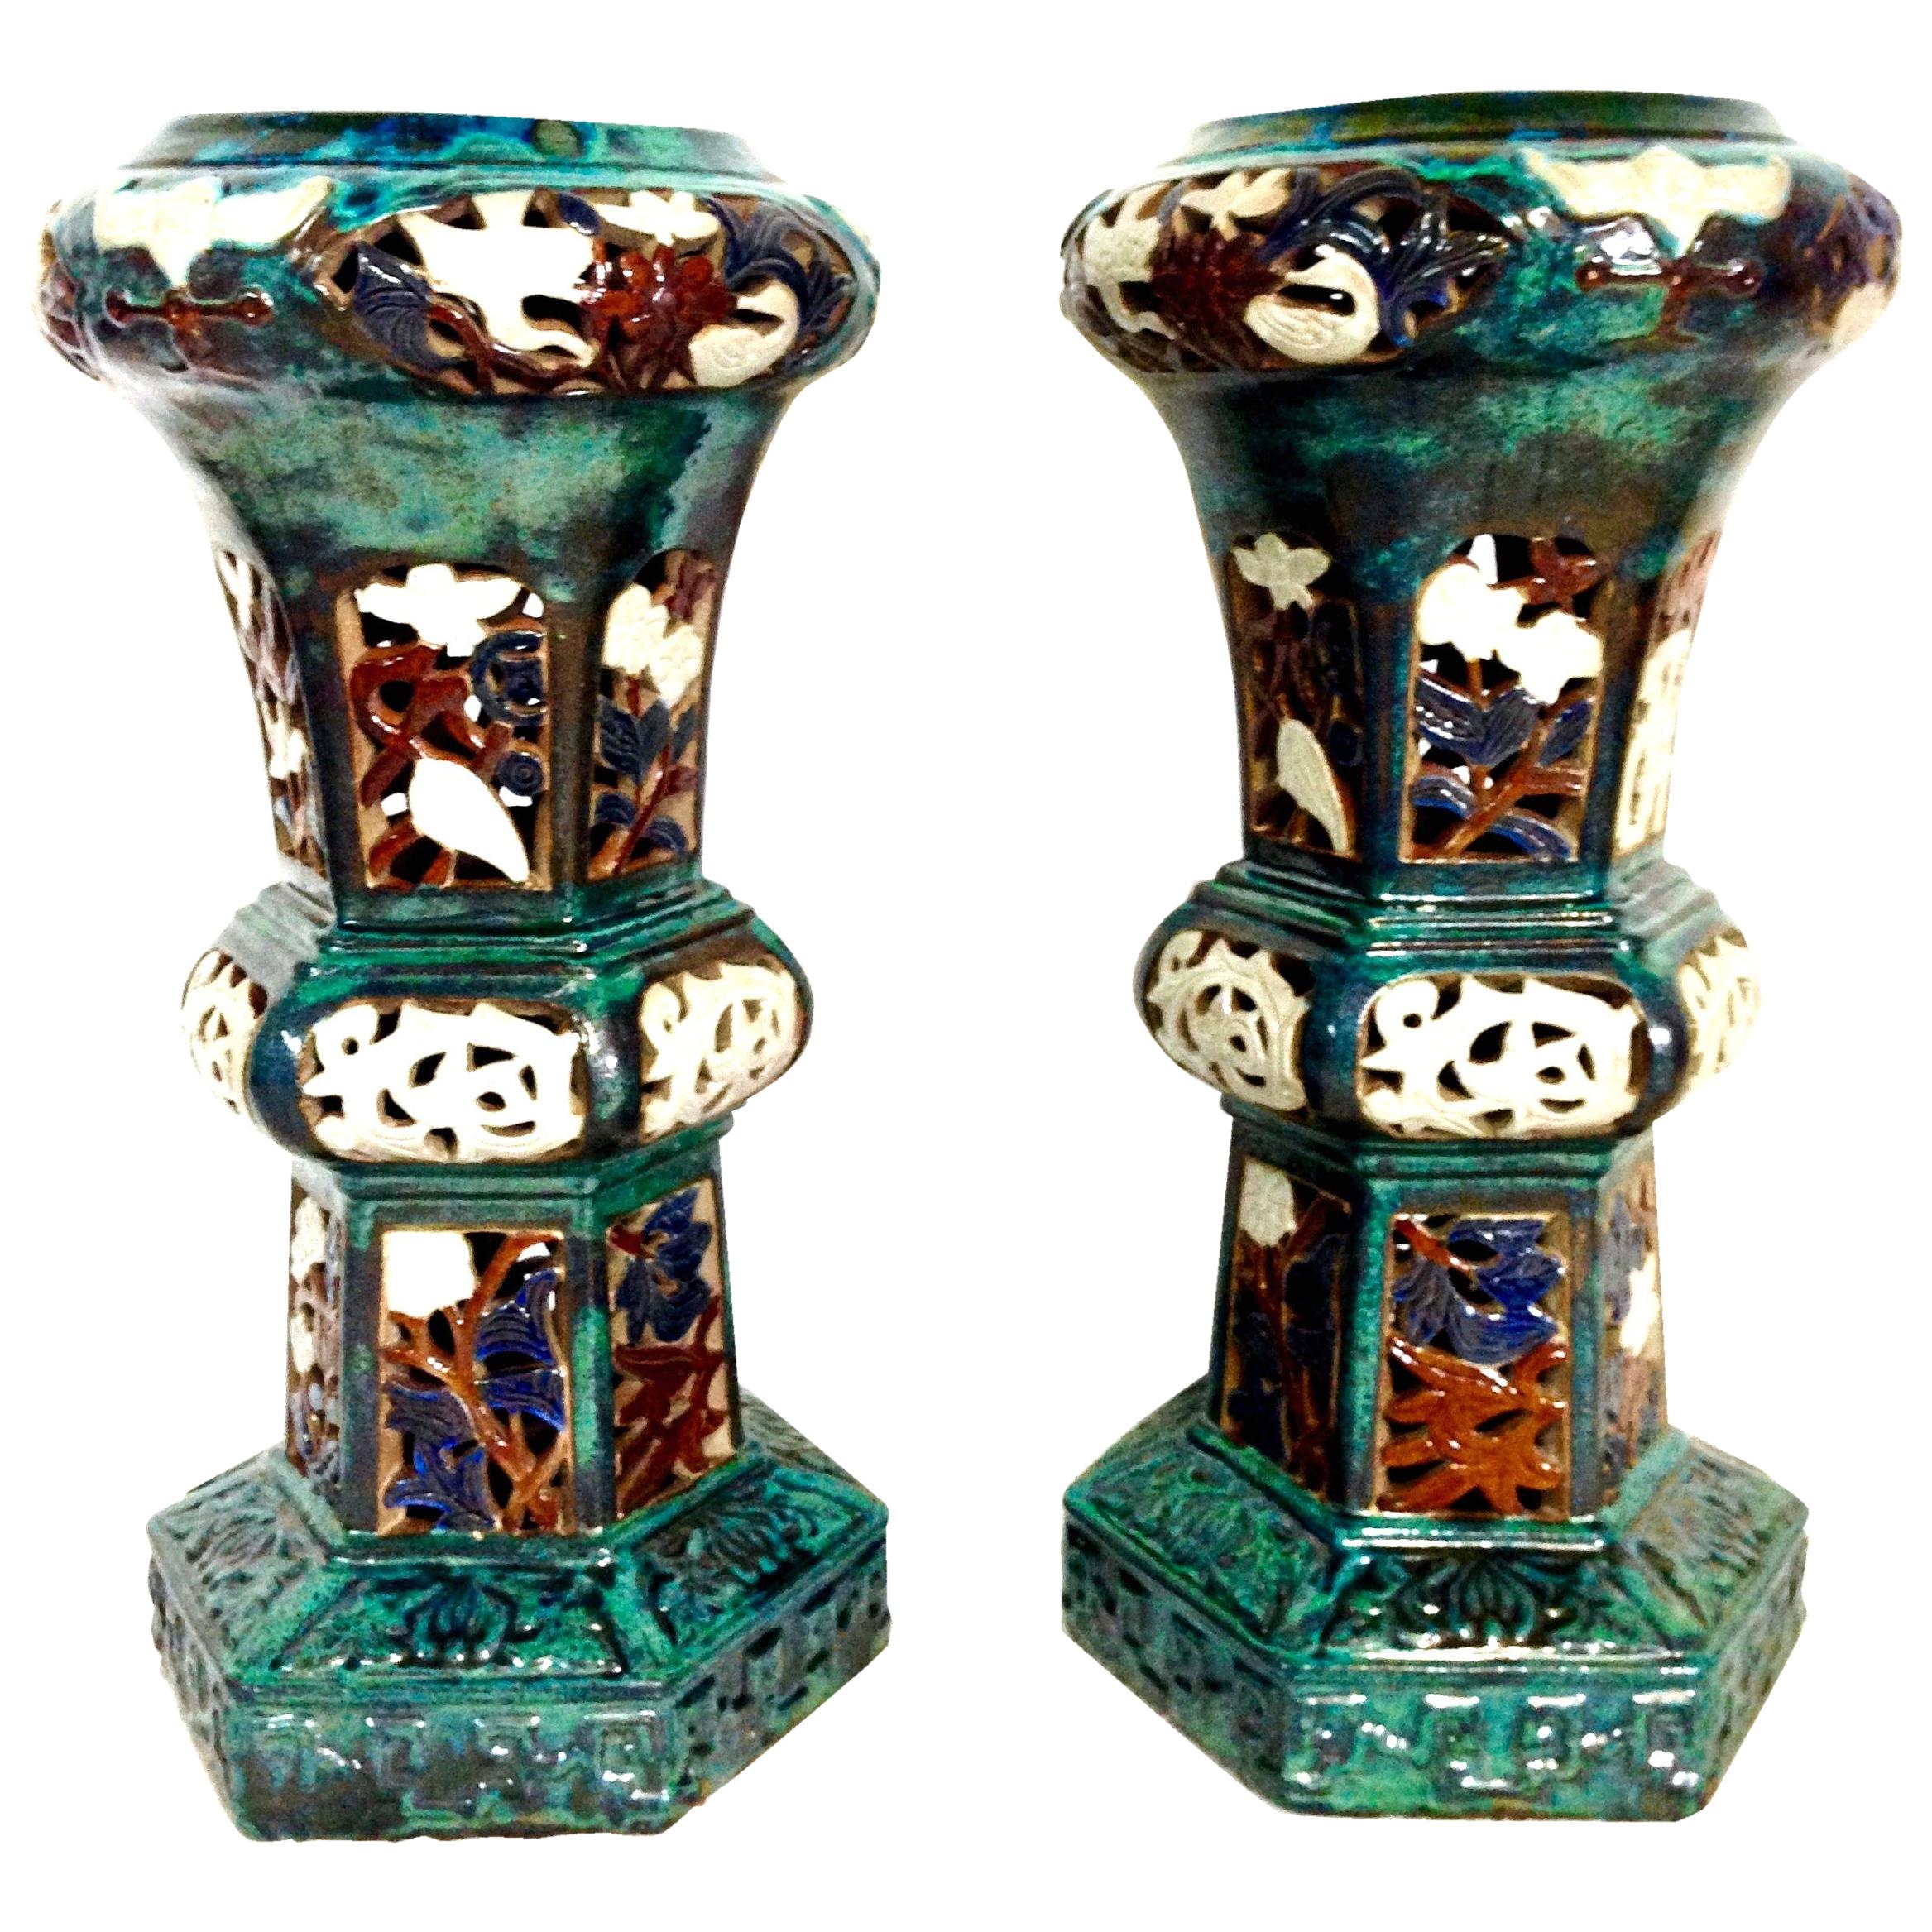 21st Century Pair of Monumental Ceramic Glaze Chinese Export Garden Plant Stands For Sale